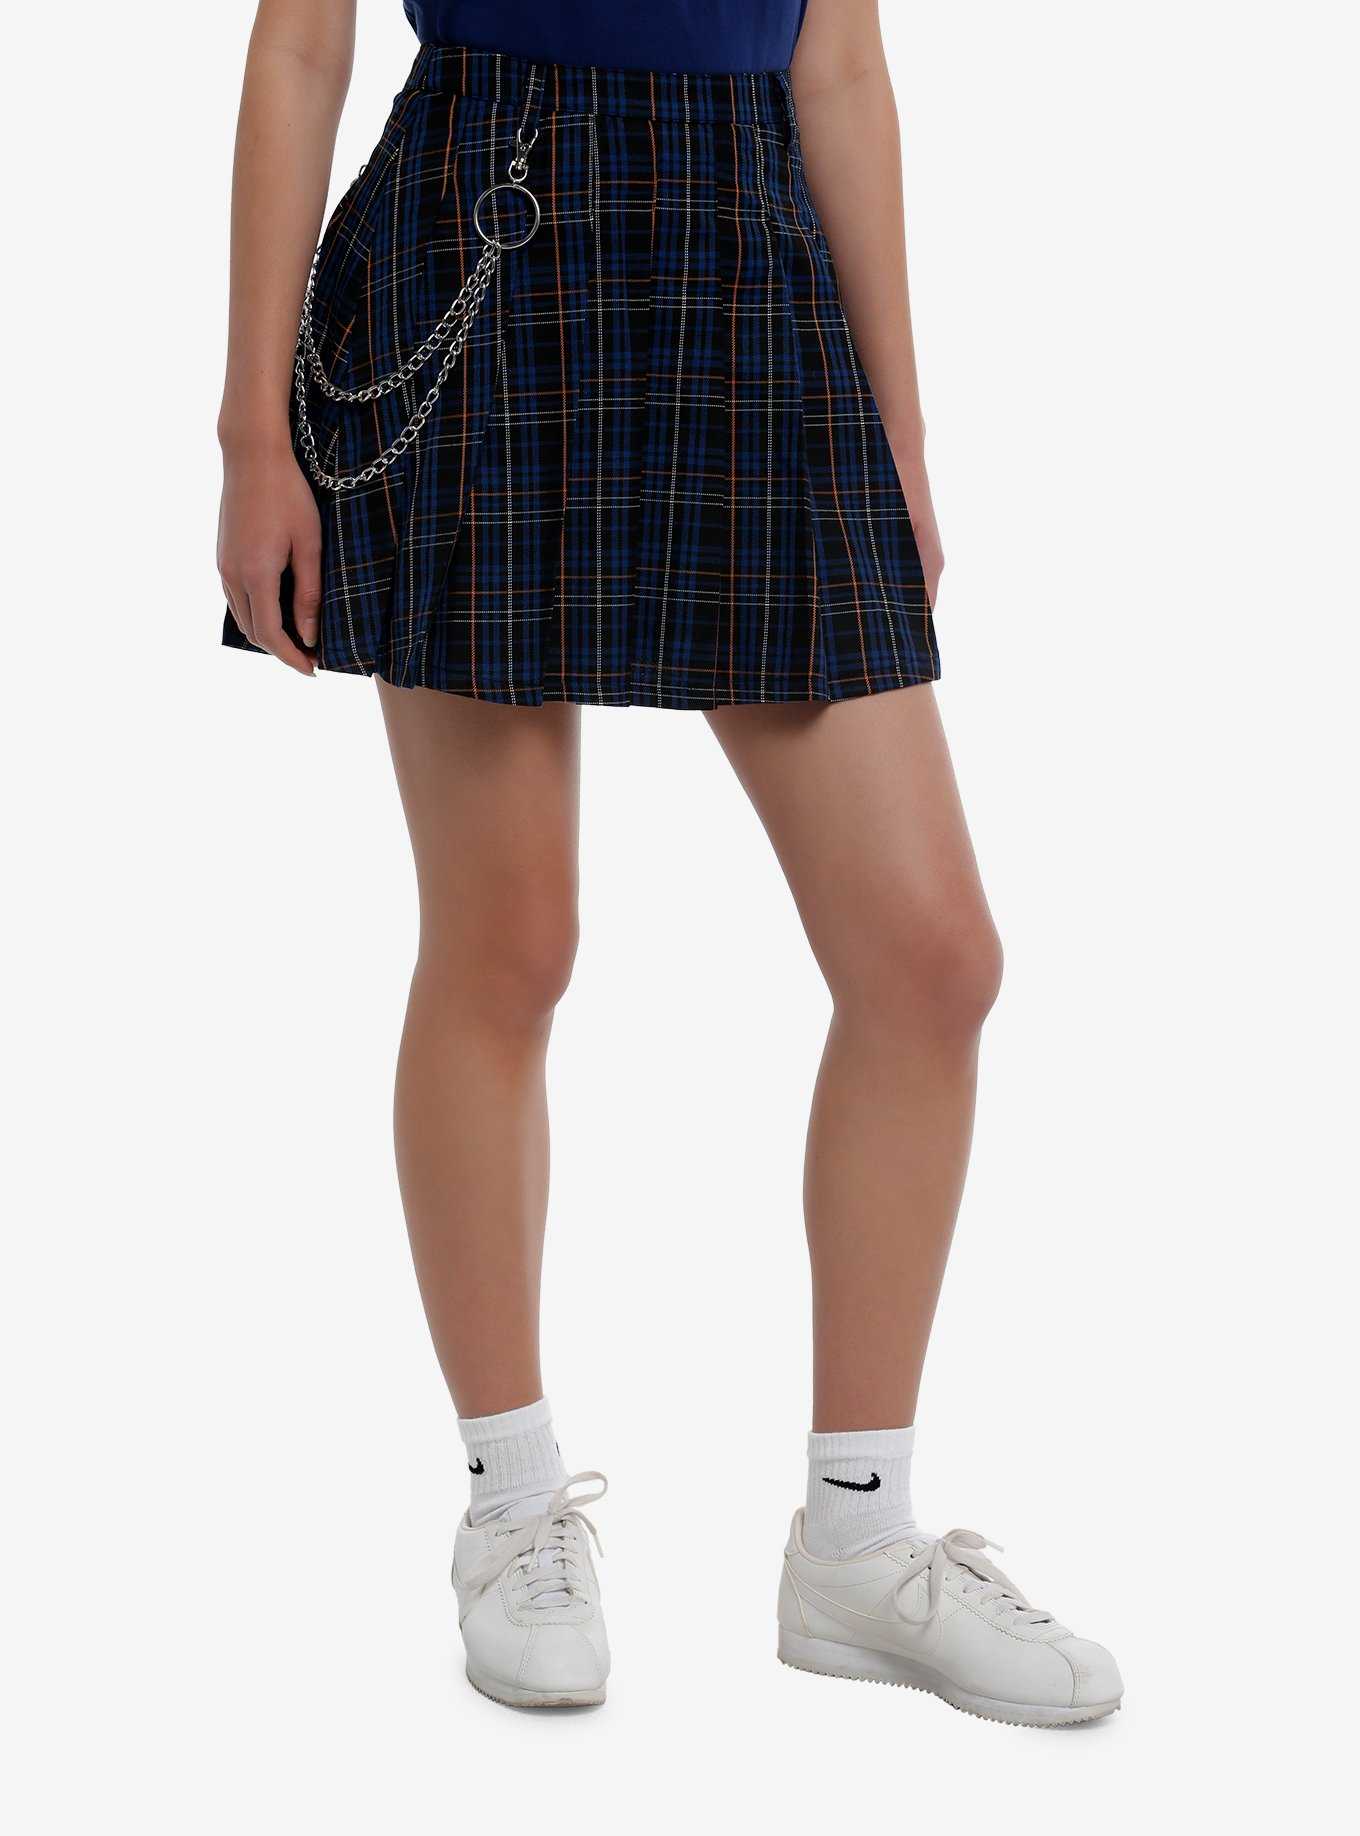 Social Collision® Blue & Orange Plaid Pleated Skirt With Chain, , hi-res